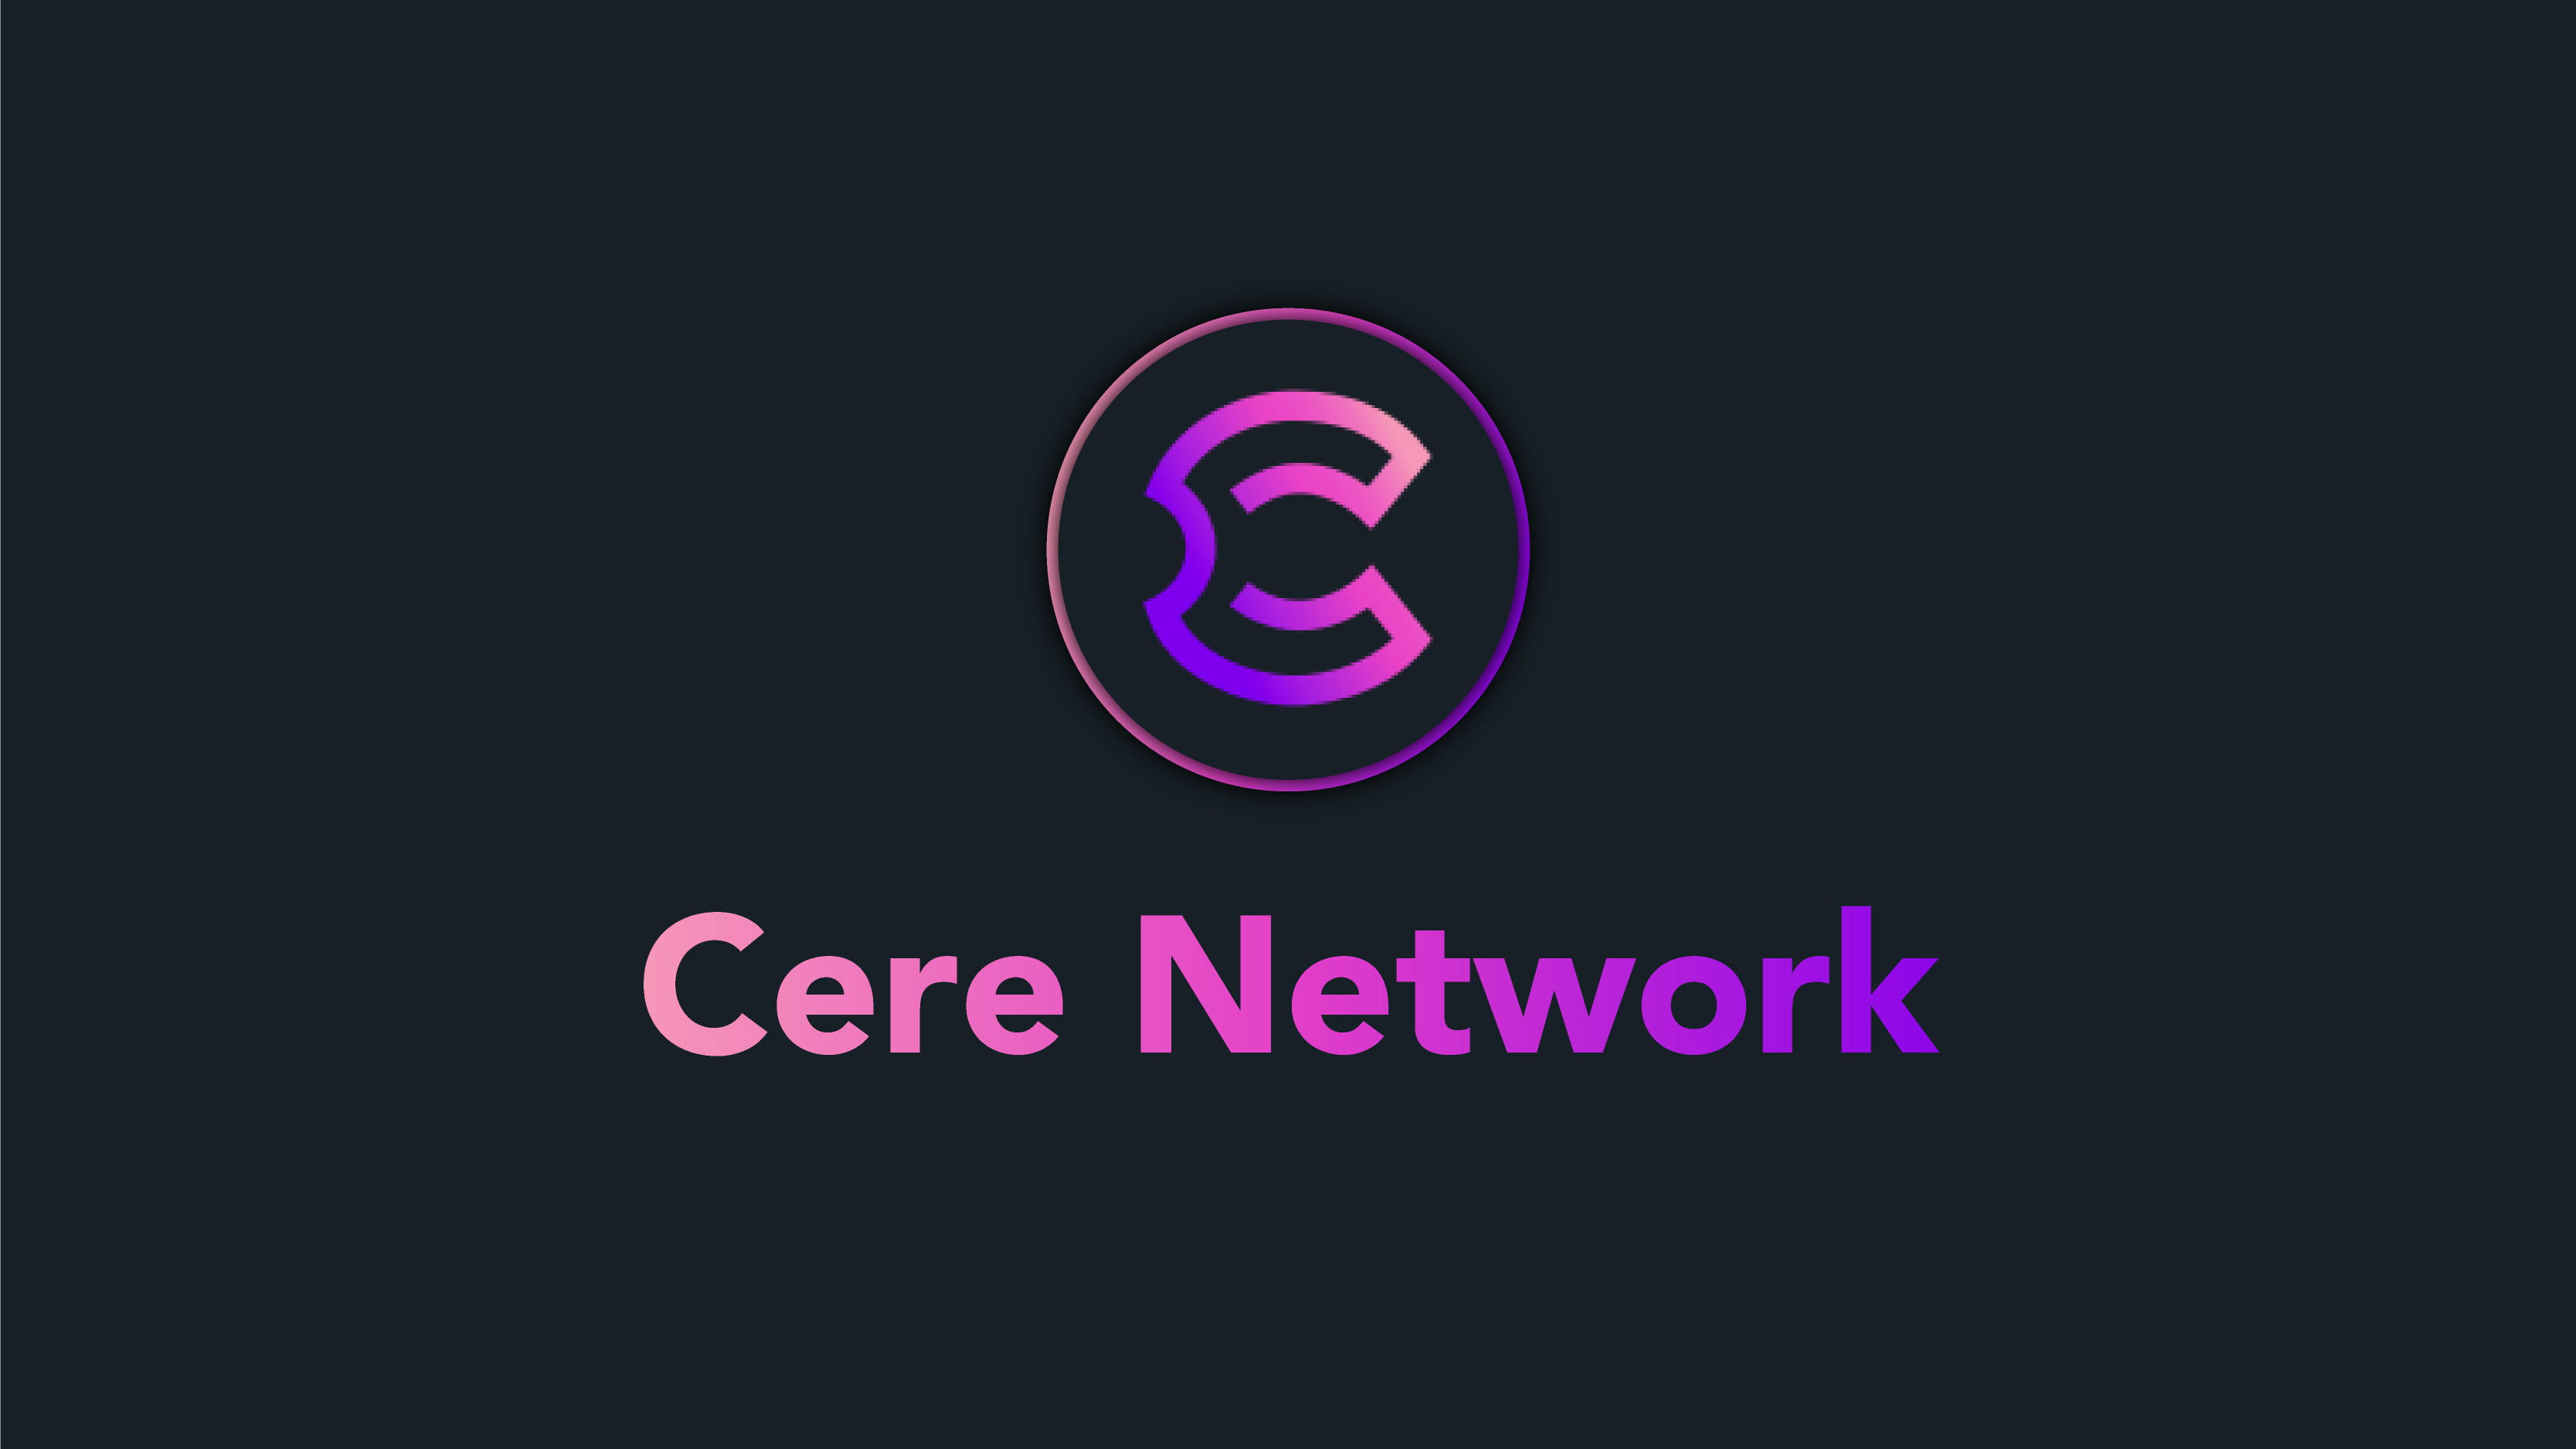 What is Cere Network And What Is The Use Of It? –